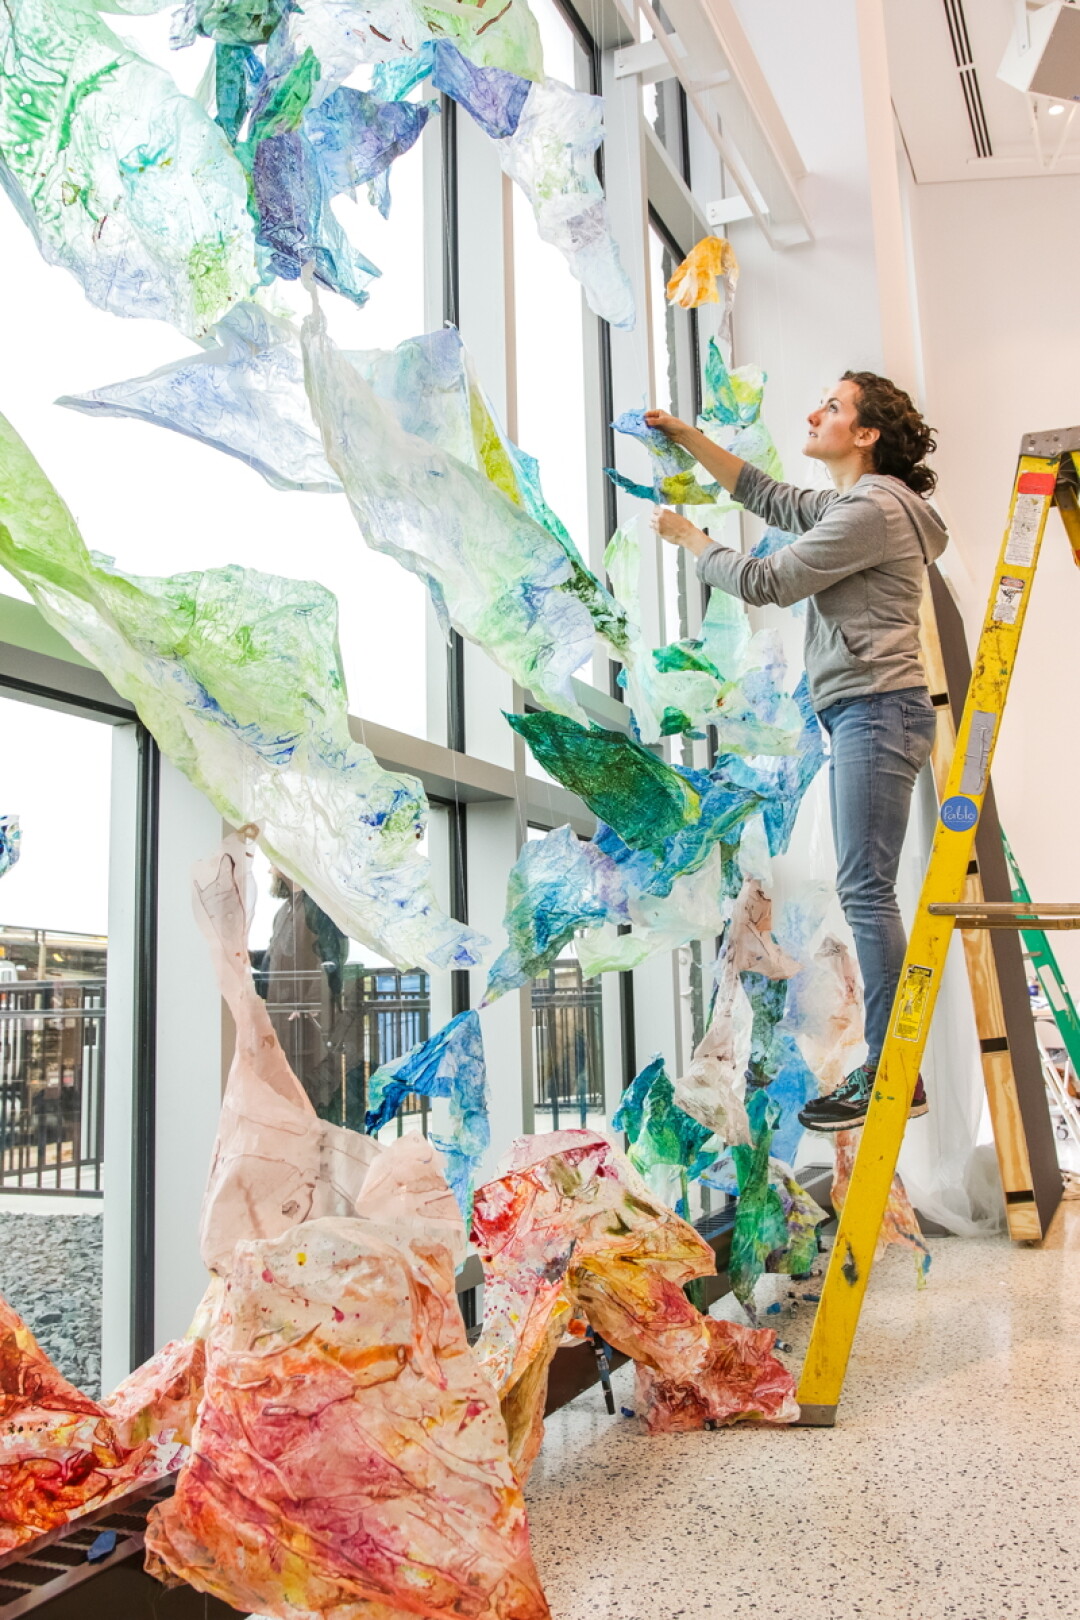 JUST HANGIN’ AT THE PABLO. Artist Holli Jacobson installs part of “NOW: Emerging Artists of the Chippewa Valley,” a new exhibit that runs through July 12 at the Pablo Center at the Confluence.